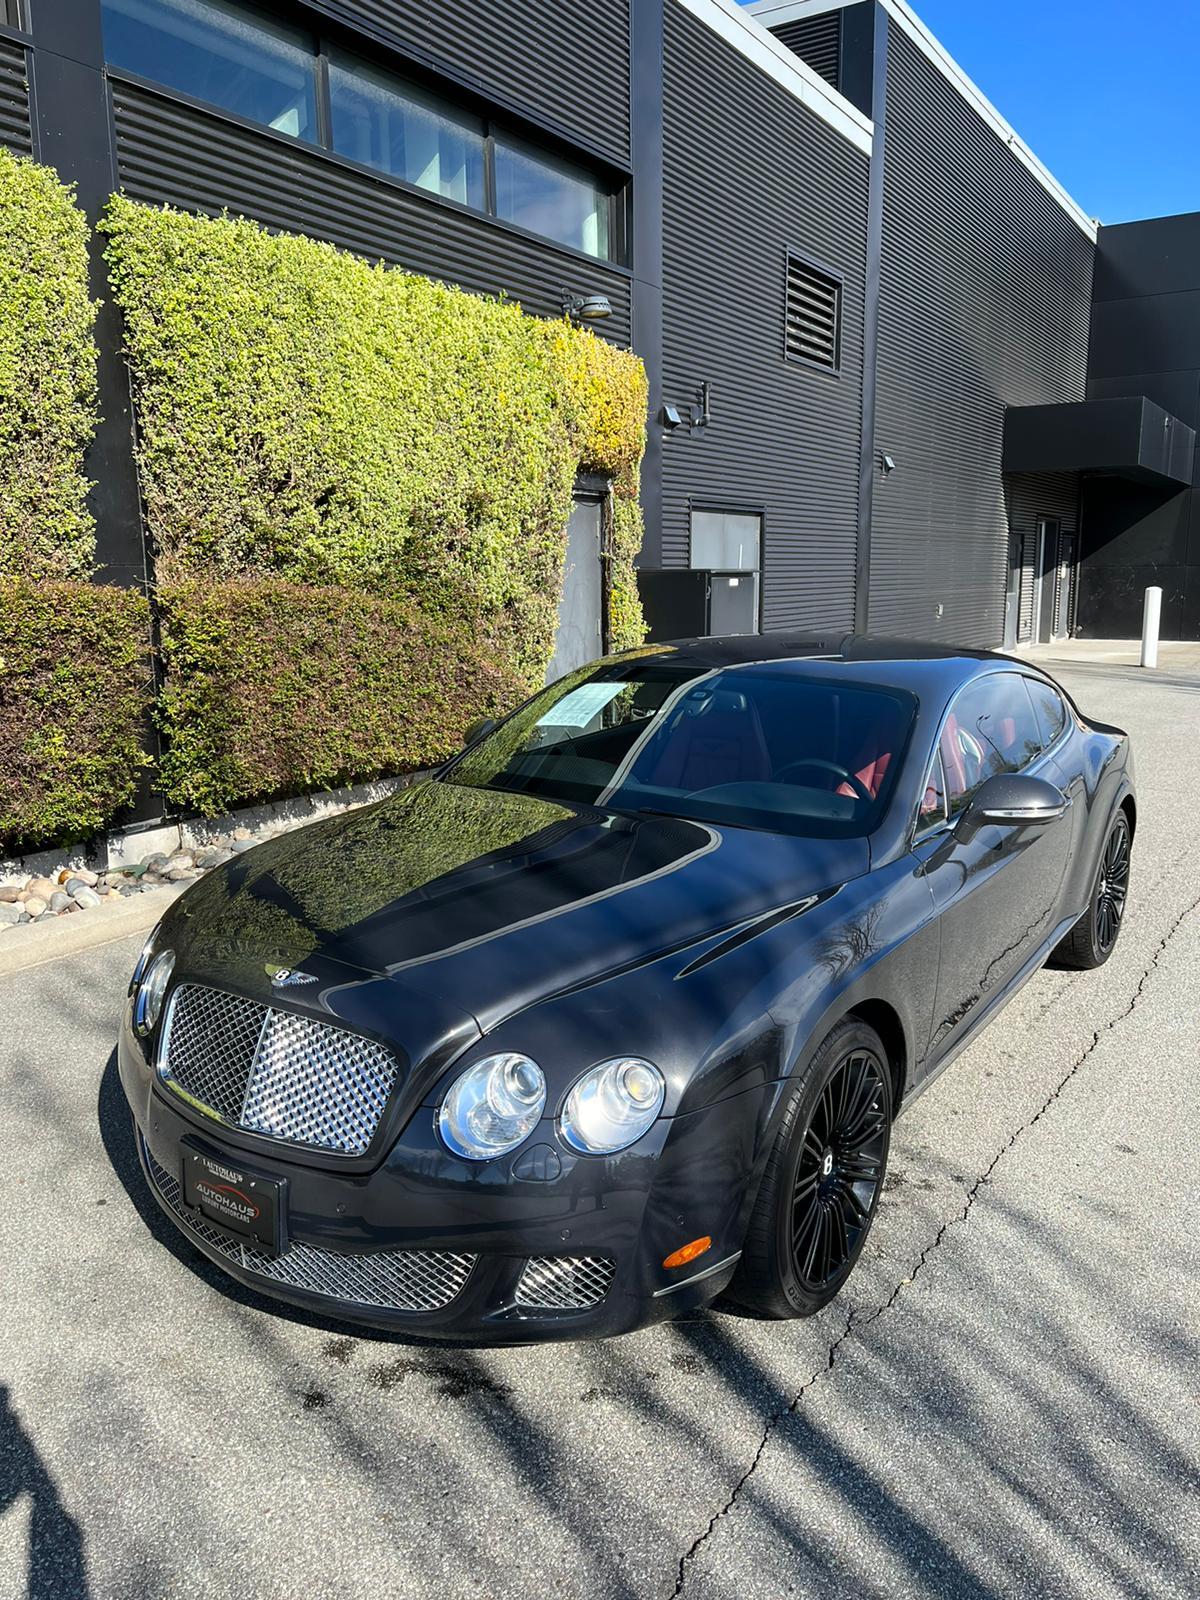 2010 Bentley Continental GT Speed AWD 2DR COUPE SPEED EDITION